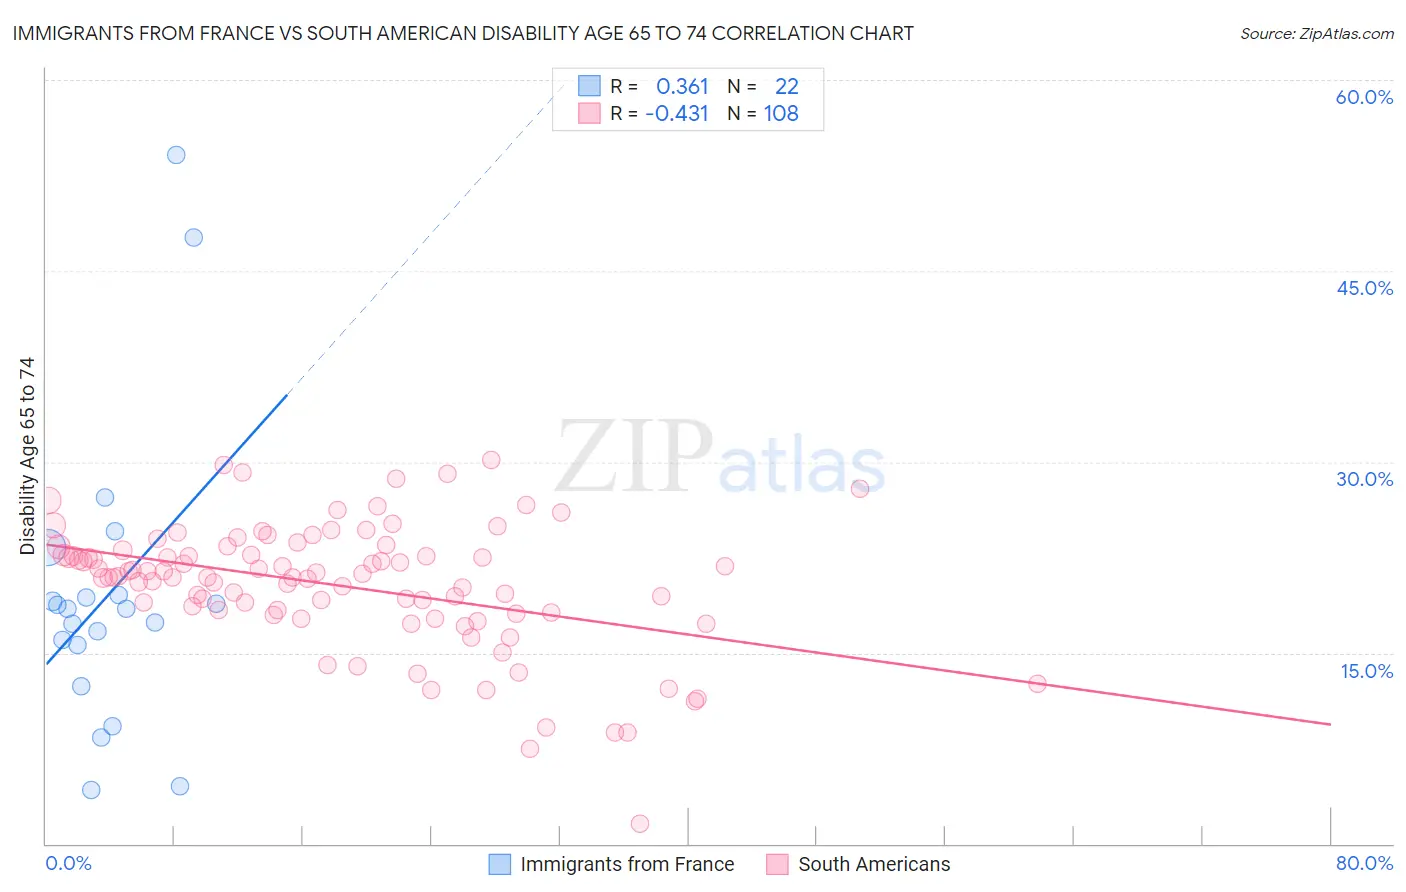 Immigrants from France vs South American Disability Age 65 to 74